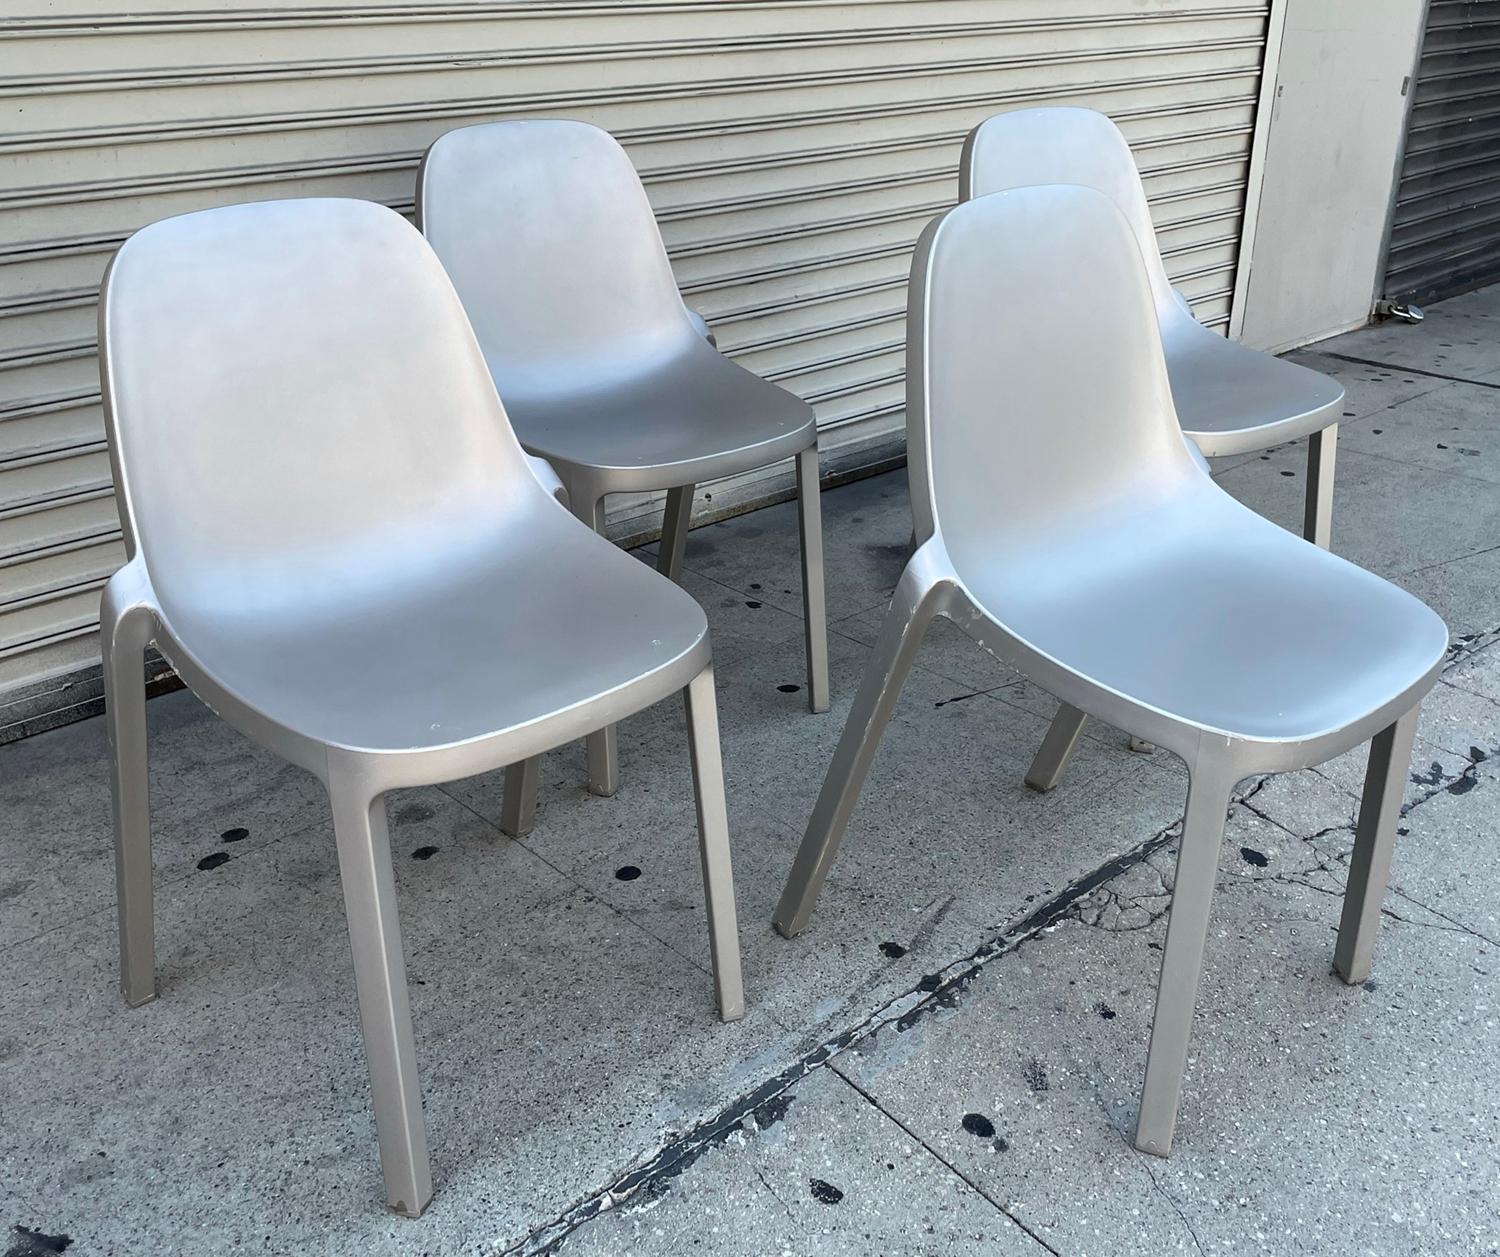 Mid-Century Modern Set of 4 Broom Chairs by Philippe Starck for Emeco